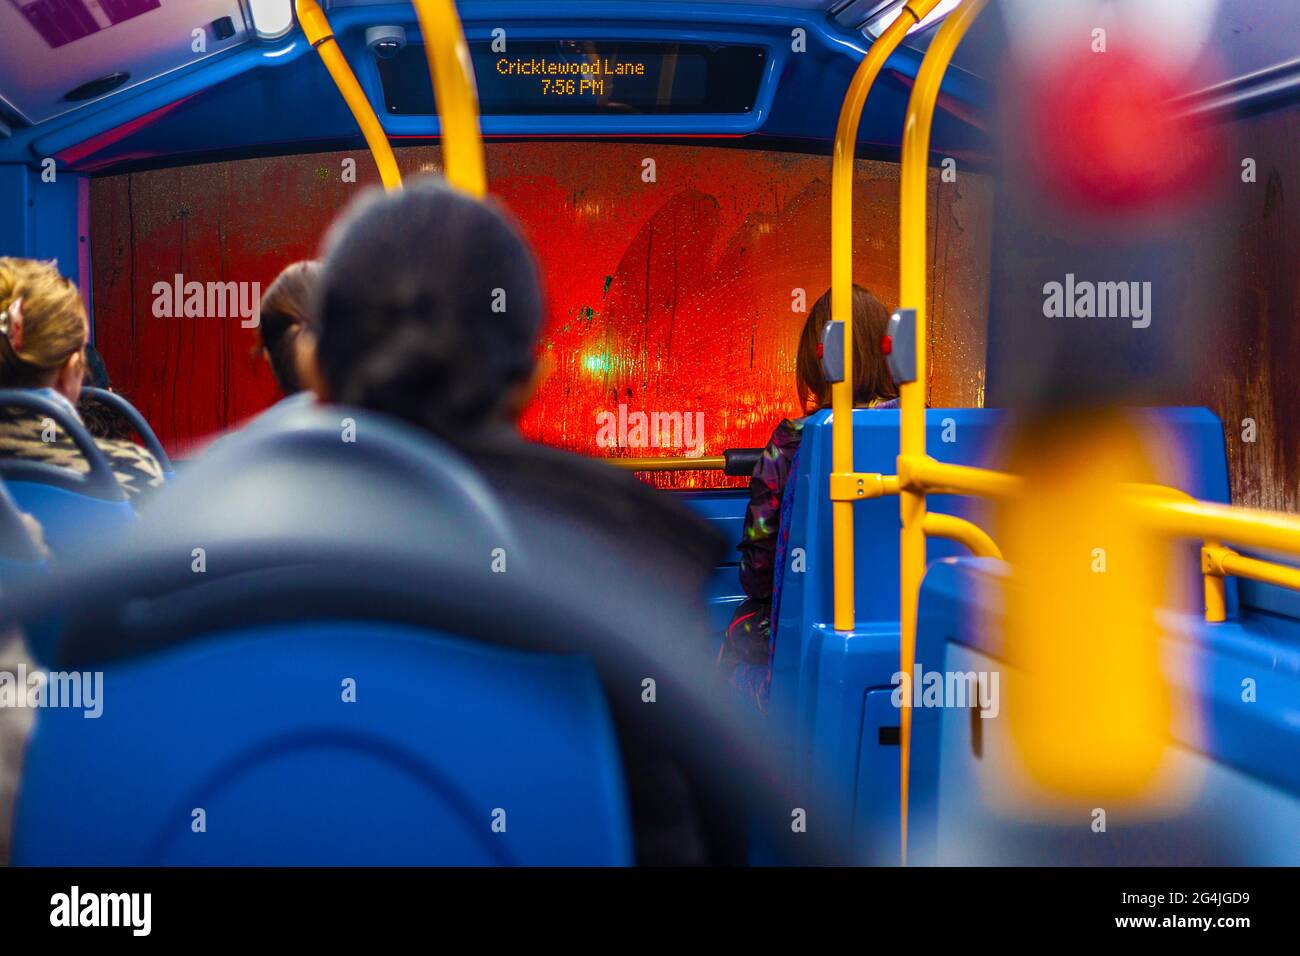 Passengers wait patiently on the upper deck of a bus stuck in traffic, on a rainy evening, London, England, UK. Stock Photo